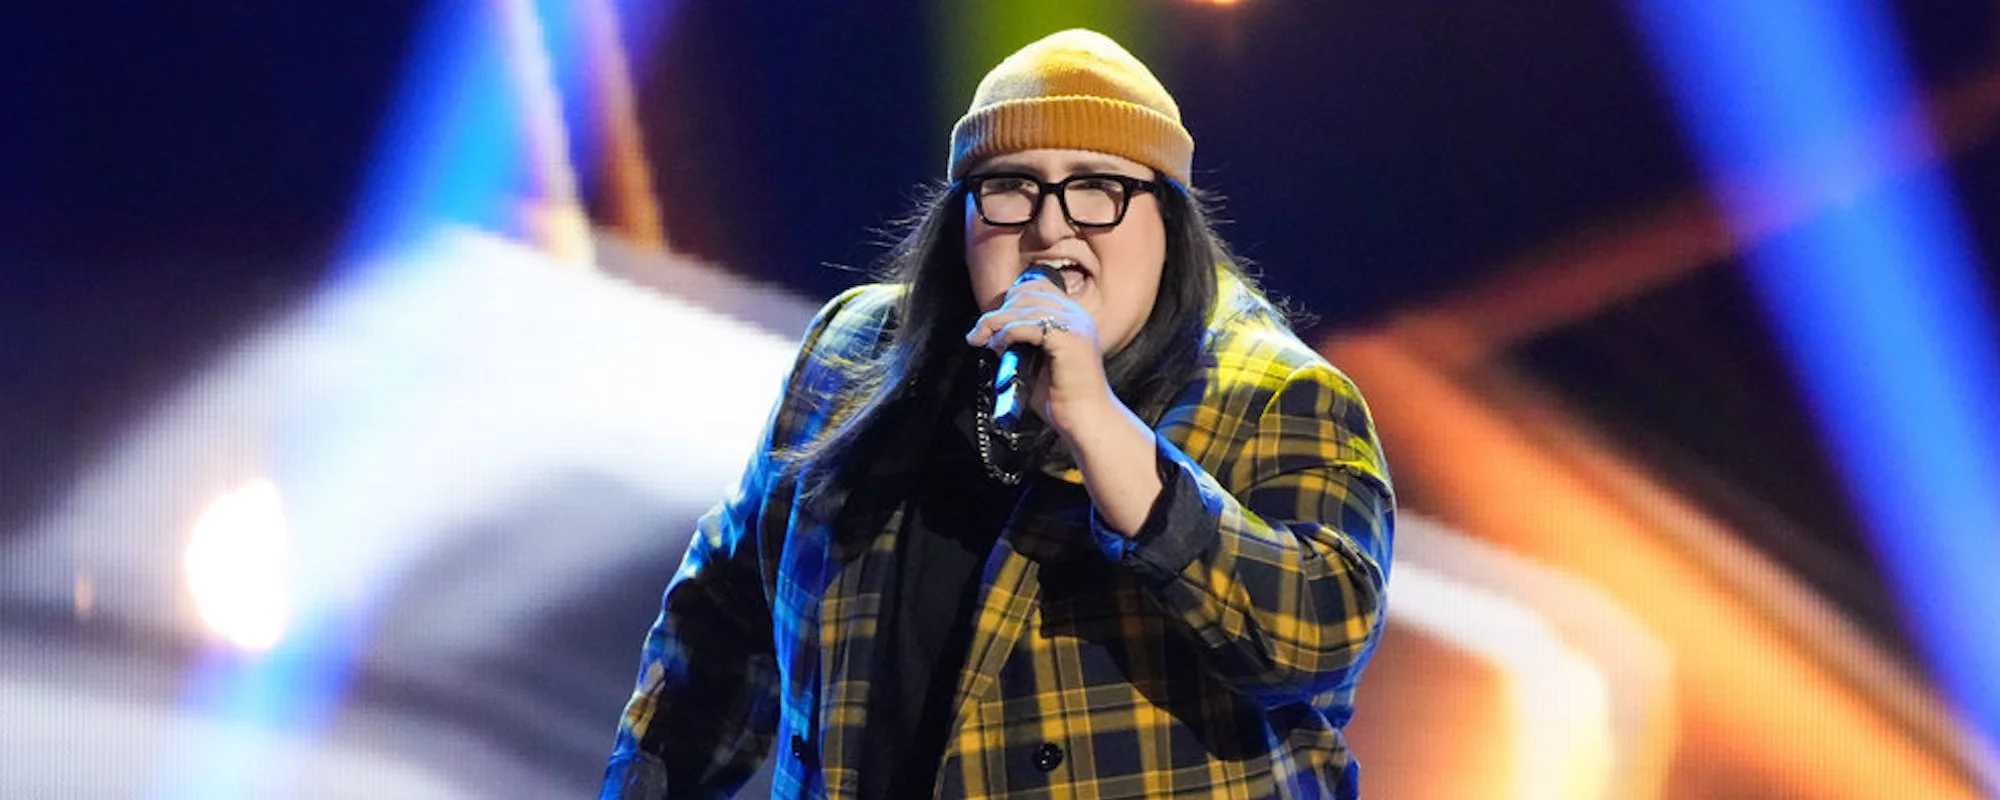 Singer Born Deaf Wows ‘The Voice’ Judges with Soul Watch Trending